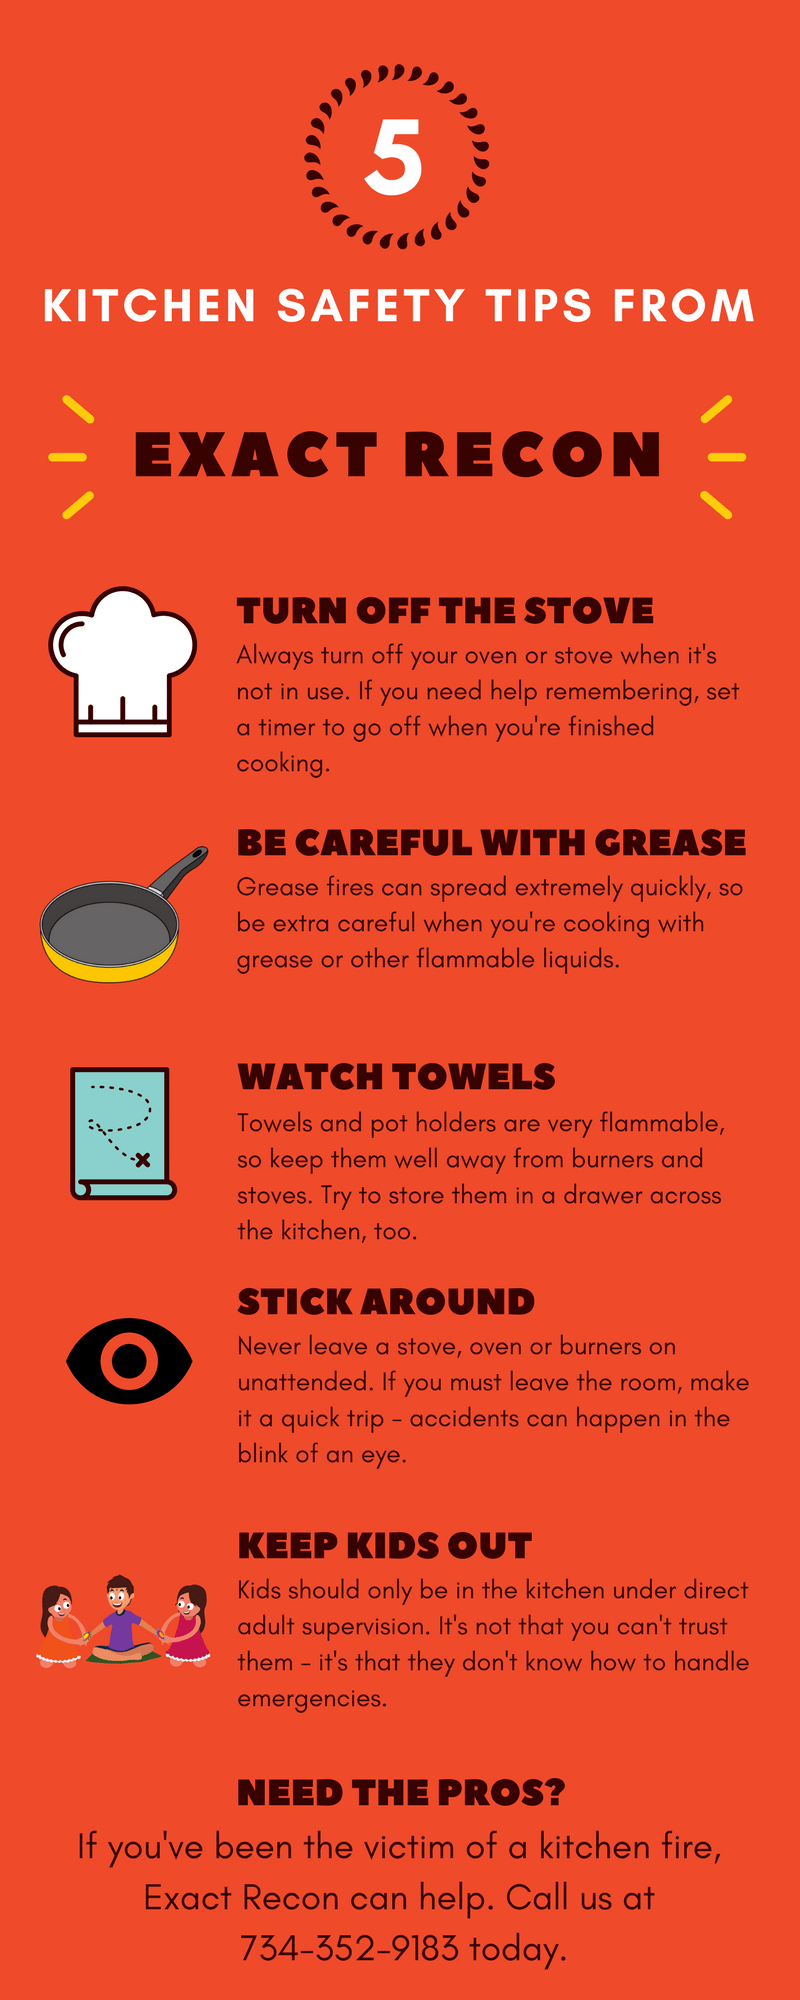 5 kitchen fire safety tips from exact recon - infographic